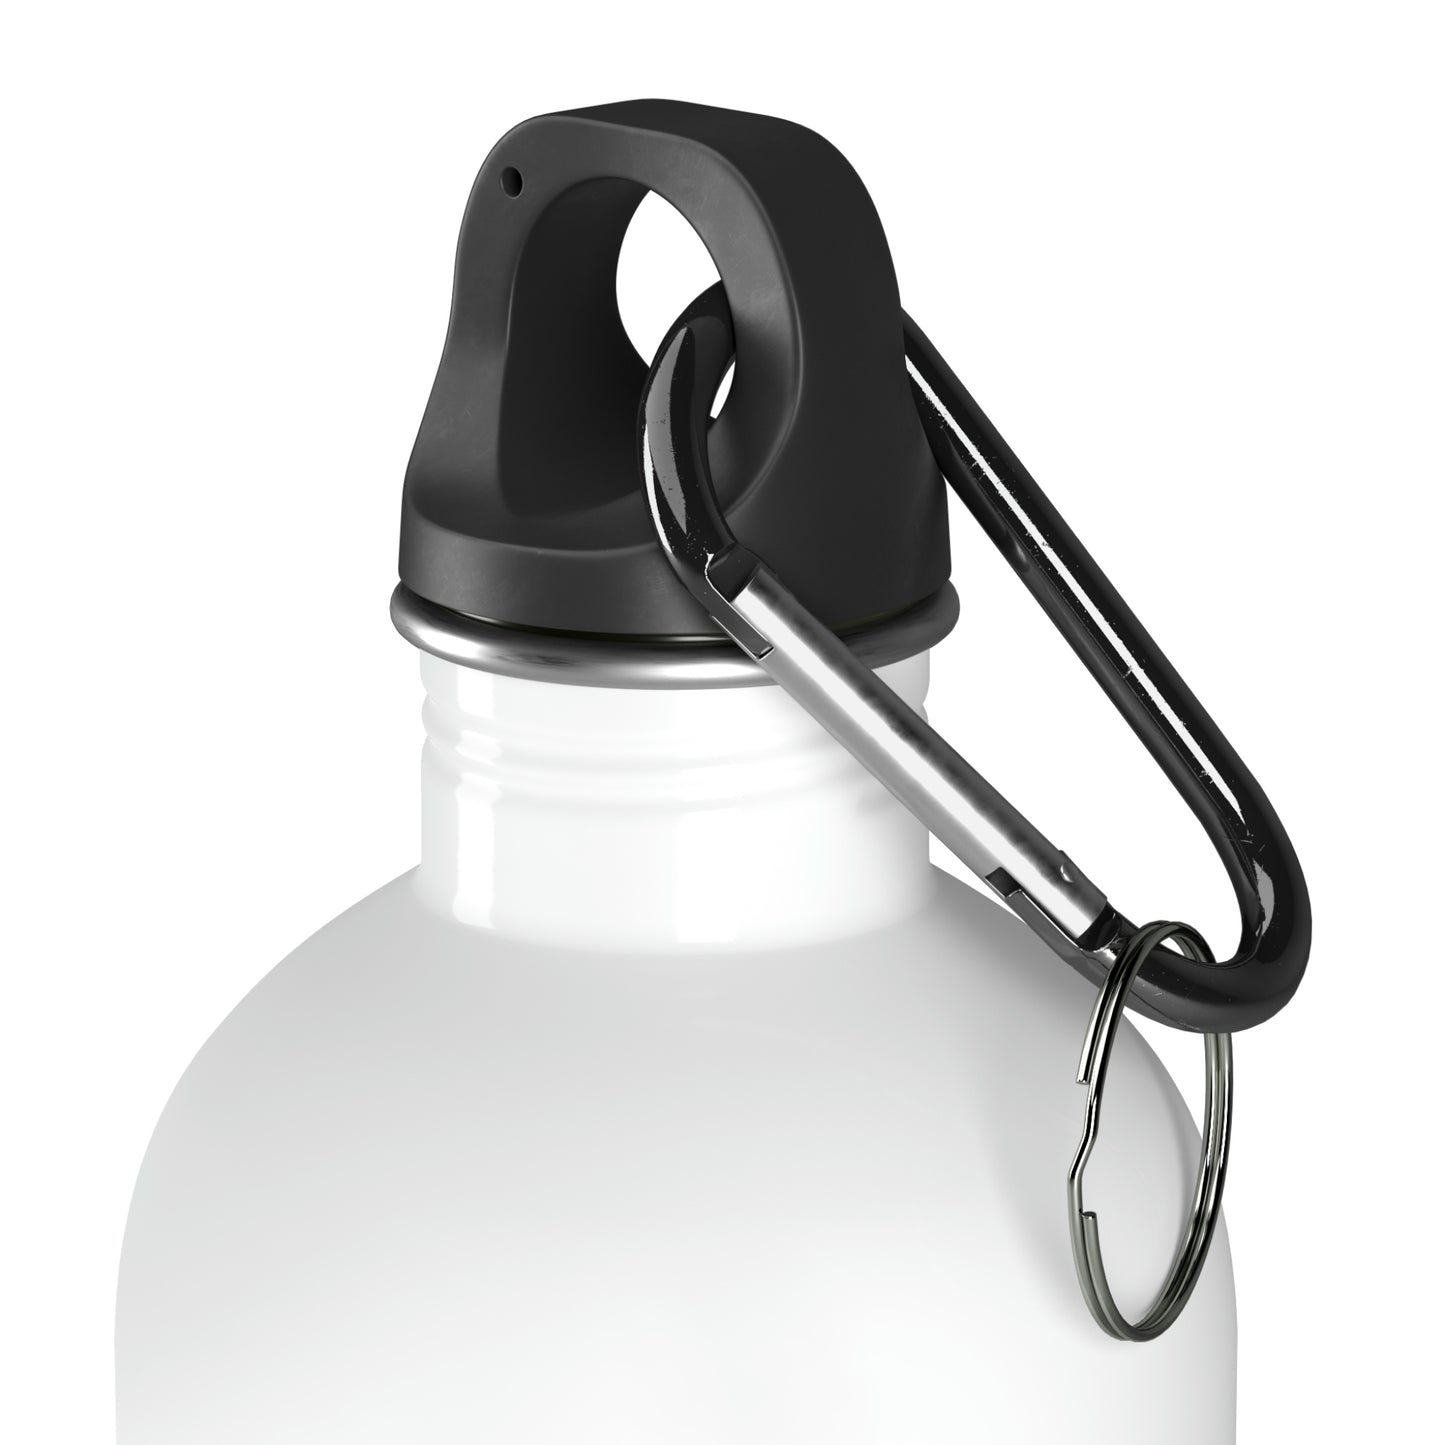 The Gnome's High-Rise Adventure - The Alien Stainless Steel Water Bottle